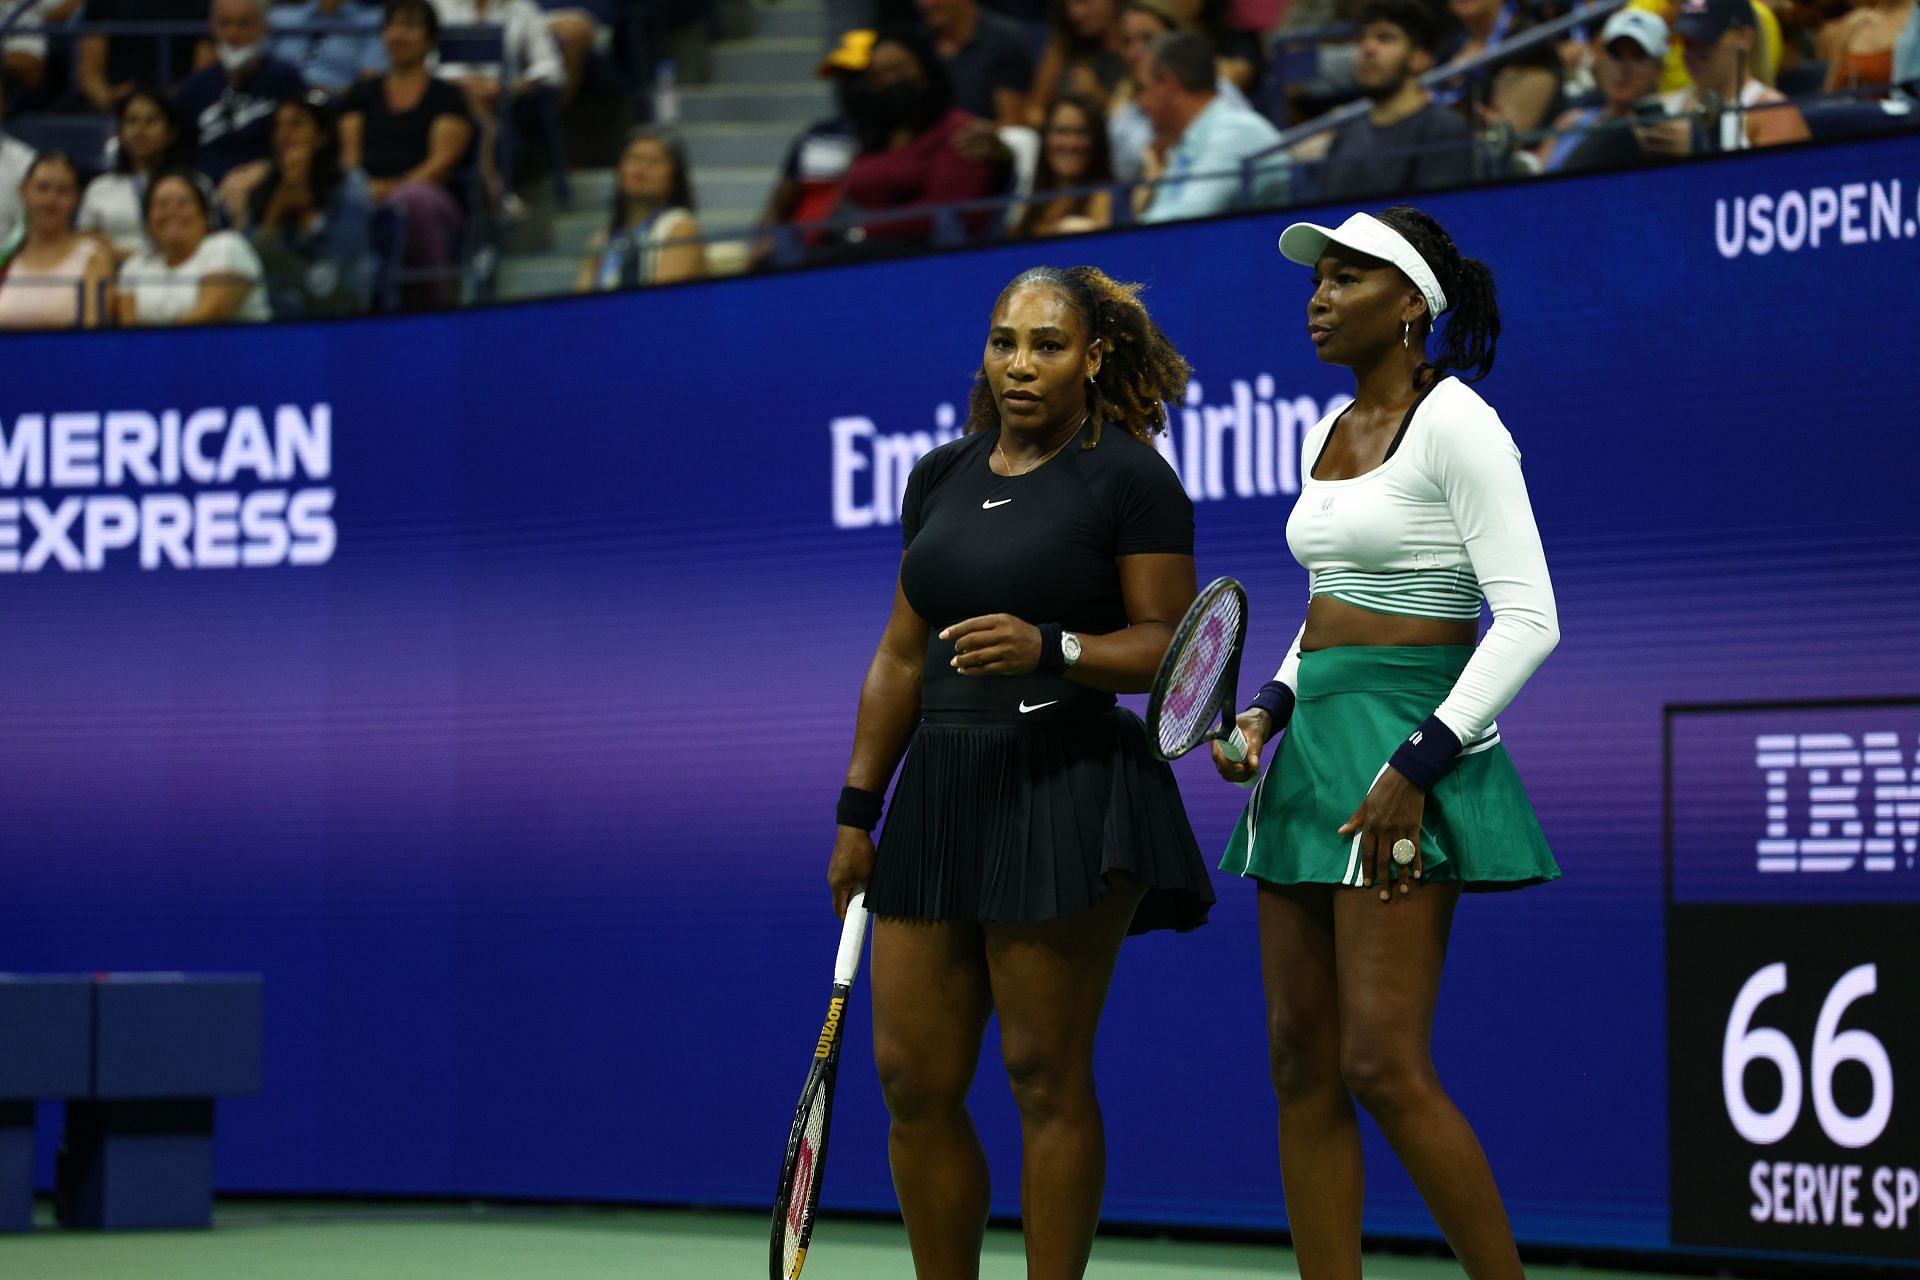 Venus Williams and Serena Williams in action at the US Open